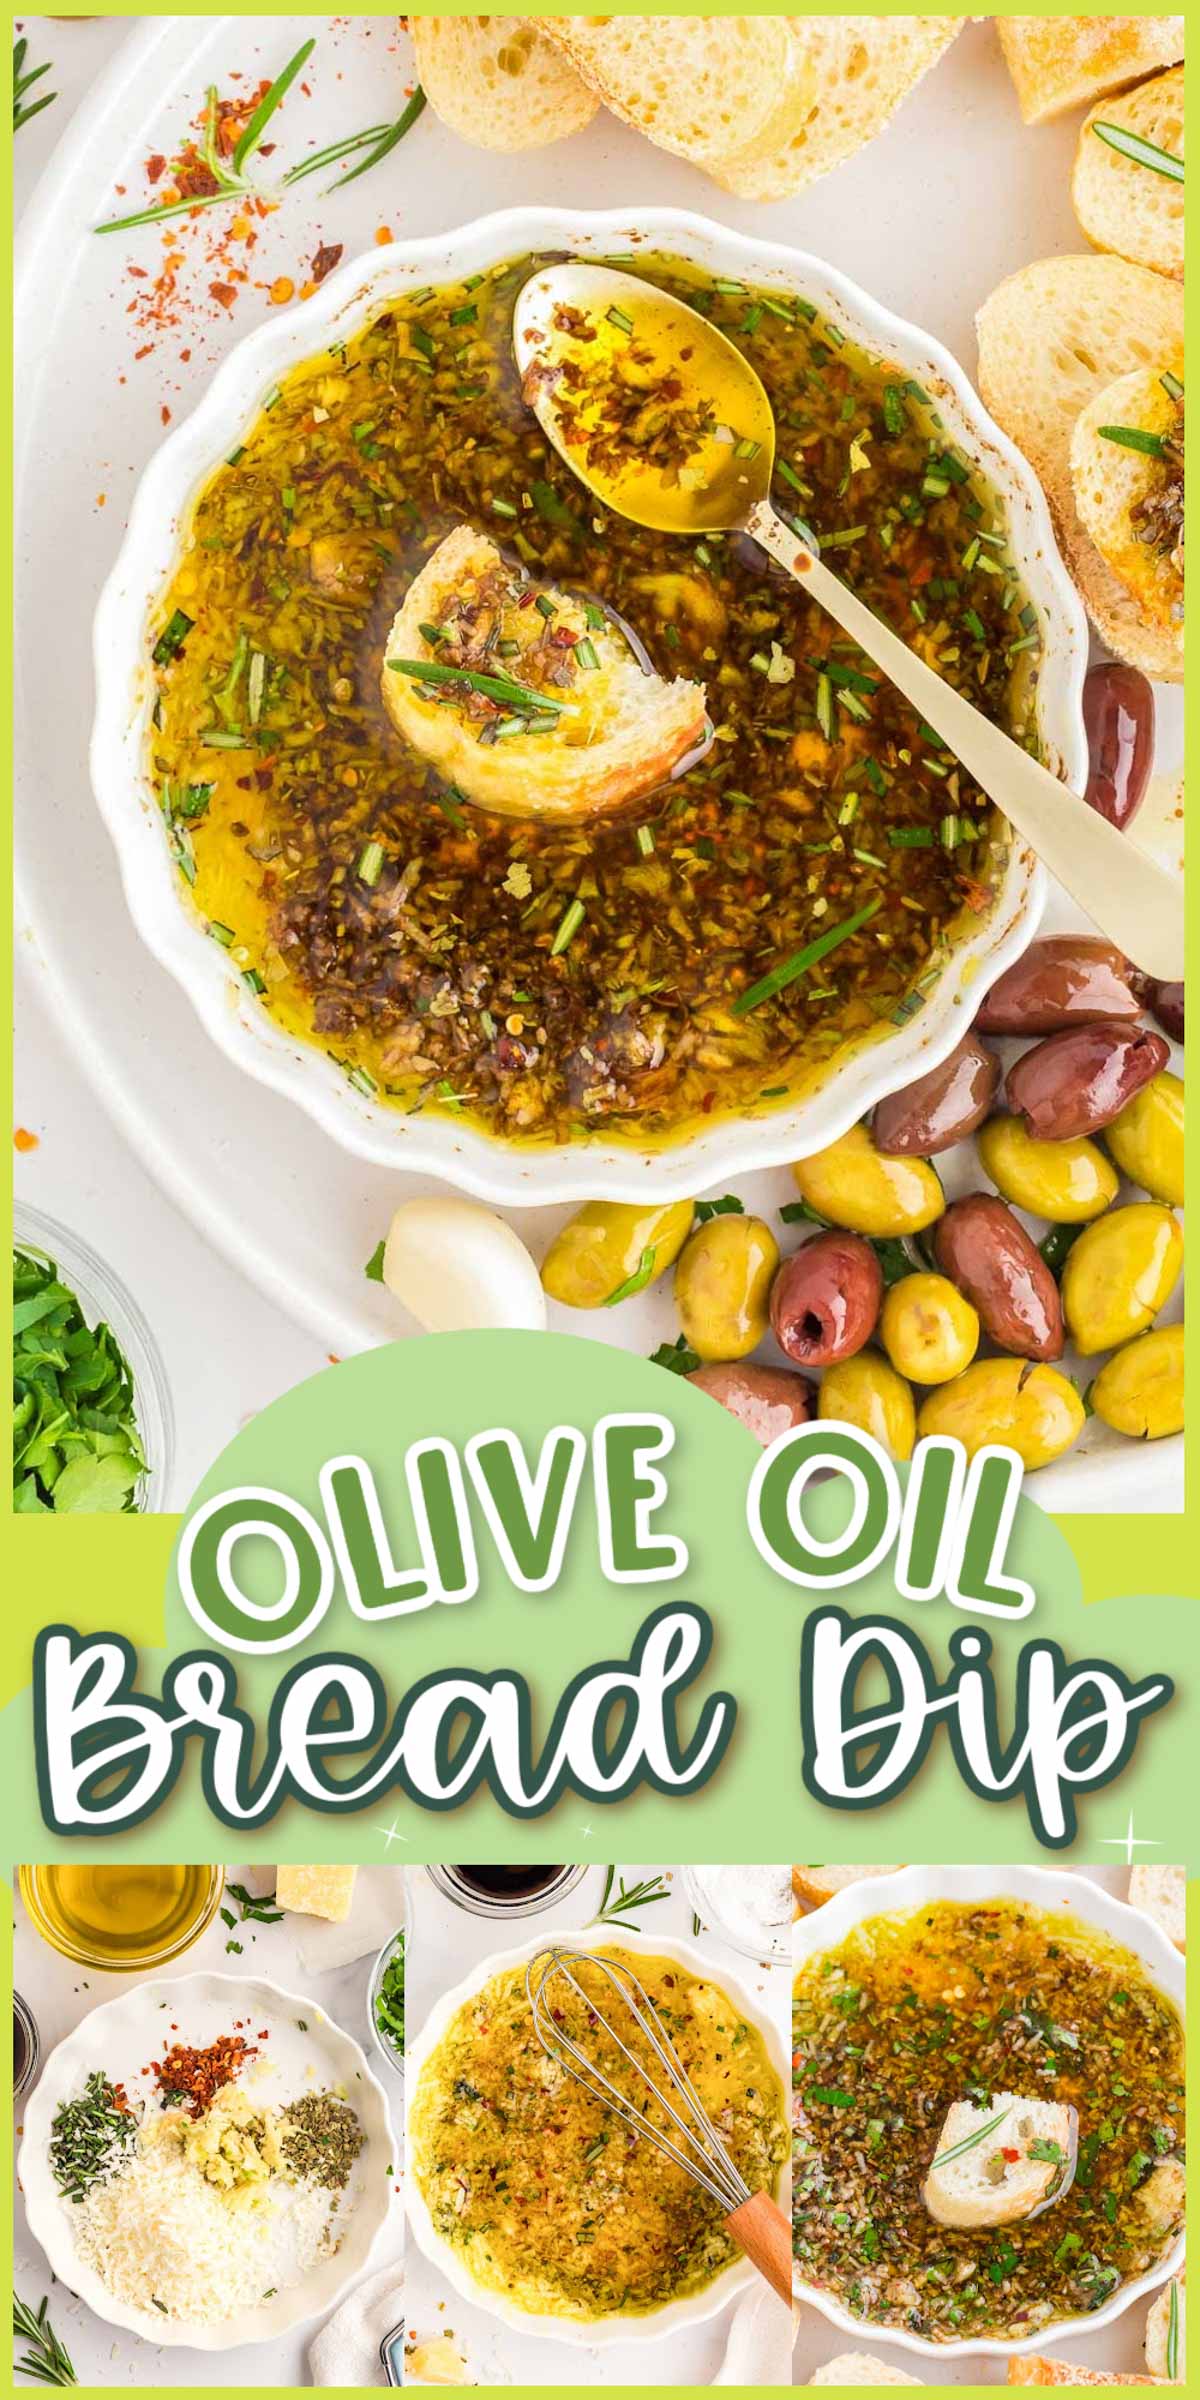 Olive oil dip is a simple and delicious appetizer or condiment that complements various dishes. It consists of extra virgin olive oil mixed with herbs, spices, and cheese.
 via @sugarandsoulco